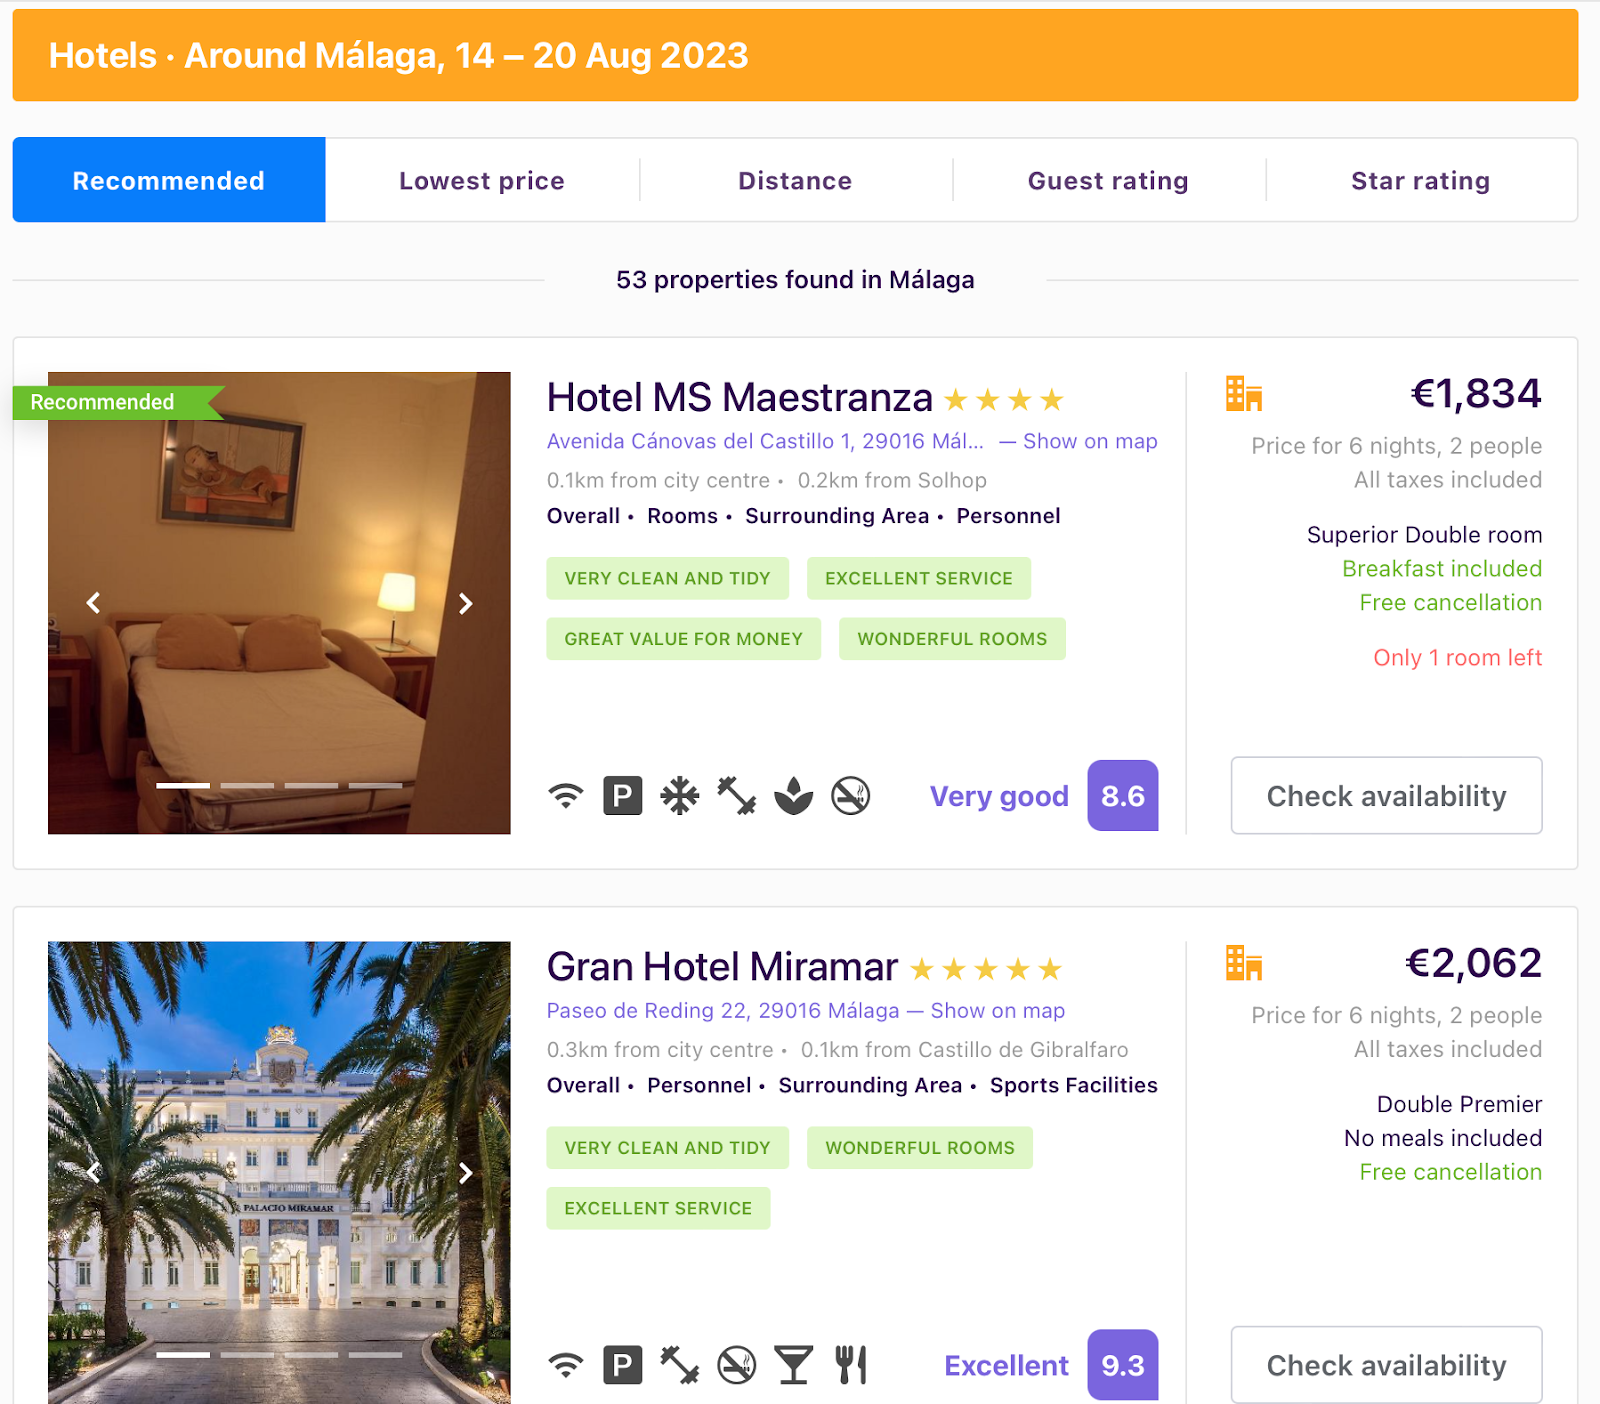 Booking your accommodation in Malaga is easy with Trazler, whether you’re looking for something as chic as the Gran Hotel Miramar, or the simpler Hotel MS Maestranza 